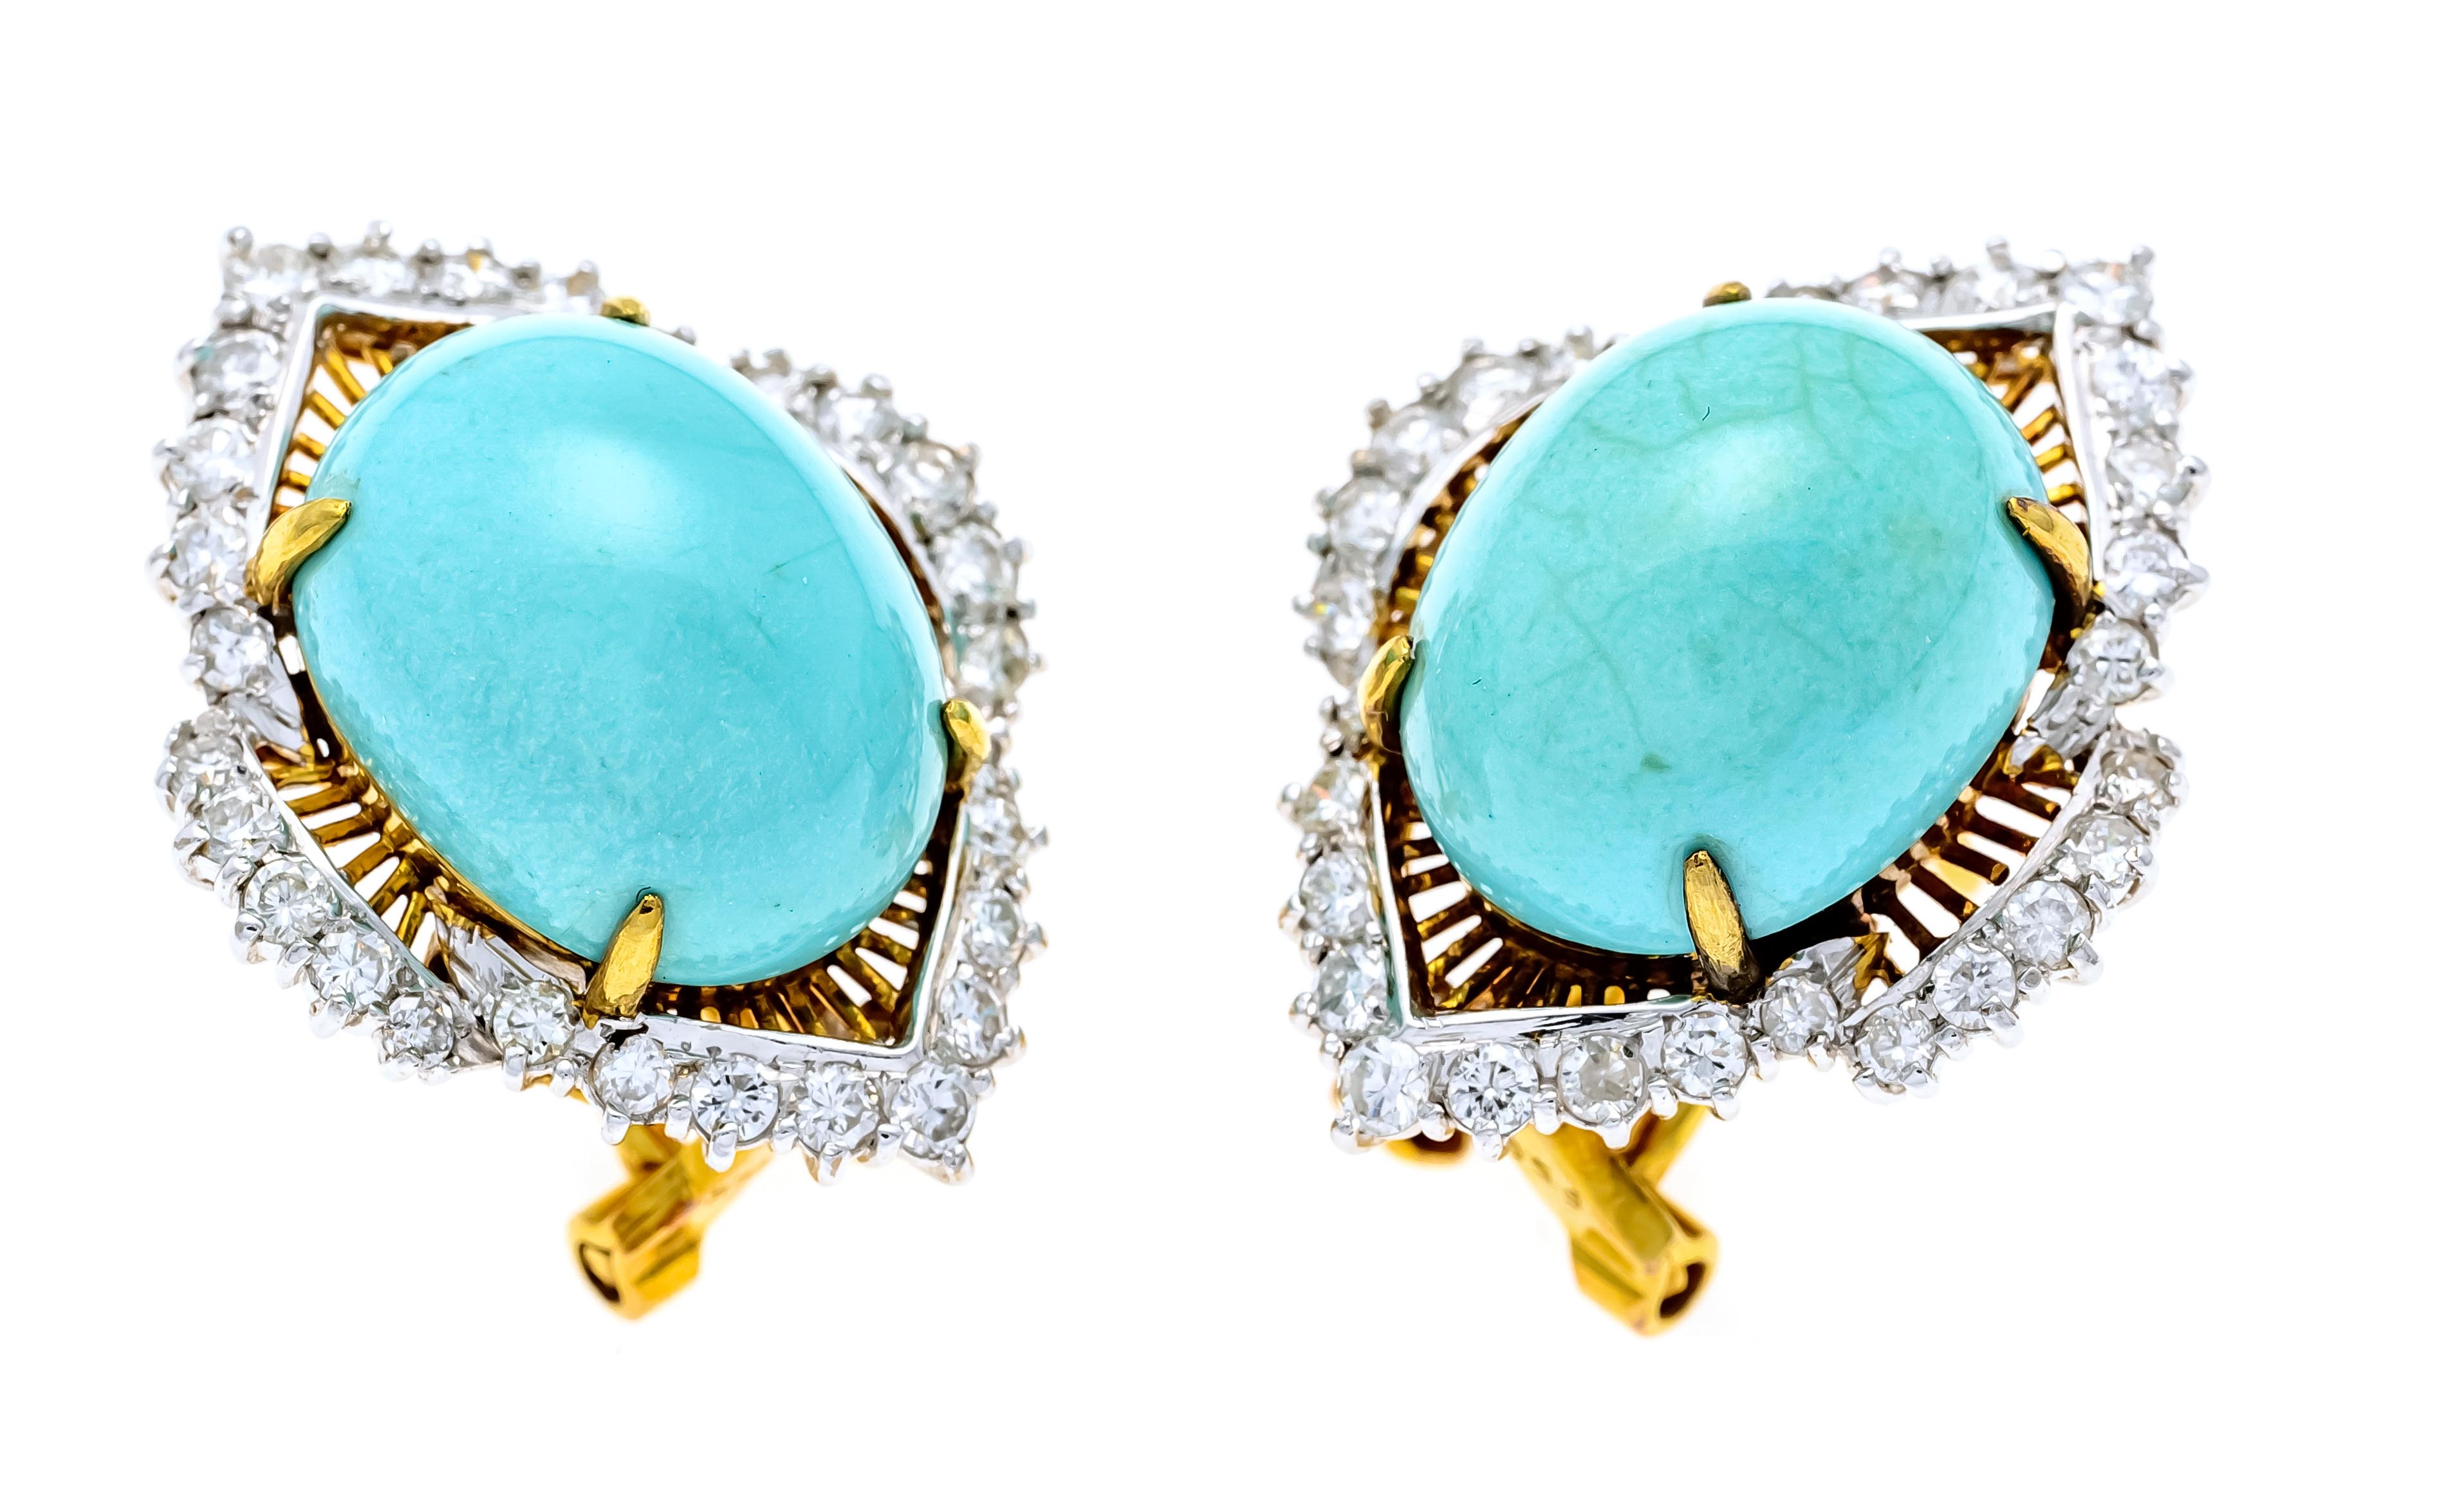 Turquoise diamond clip earrings GG 750/000 with 2 oval turquoise cabochons 13,5 x 11 mm and 58